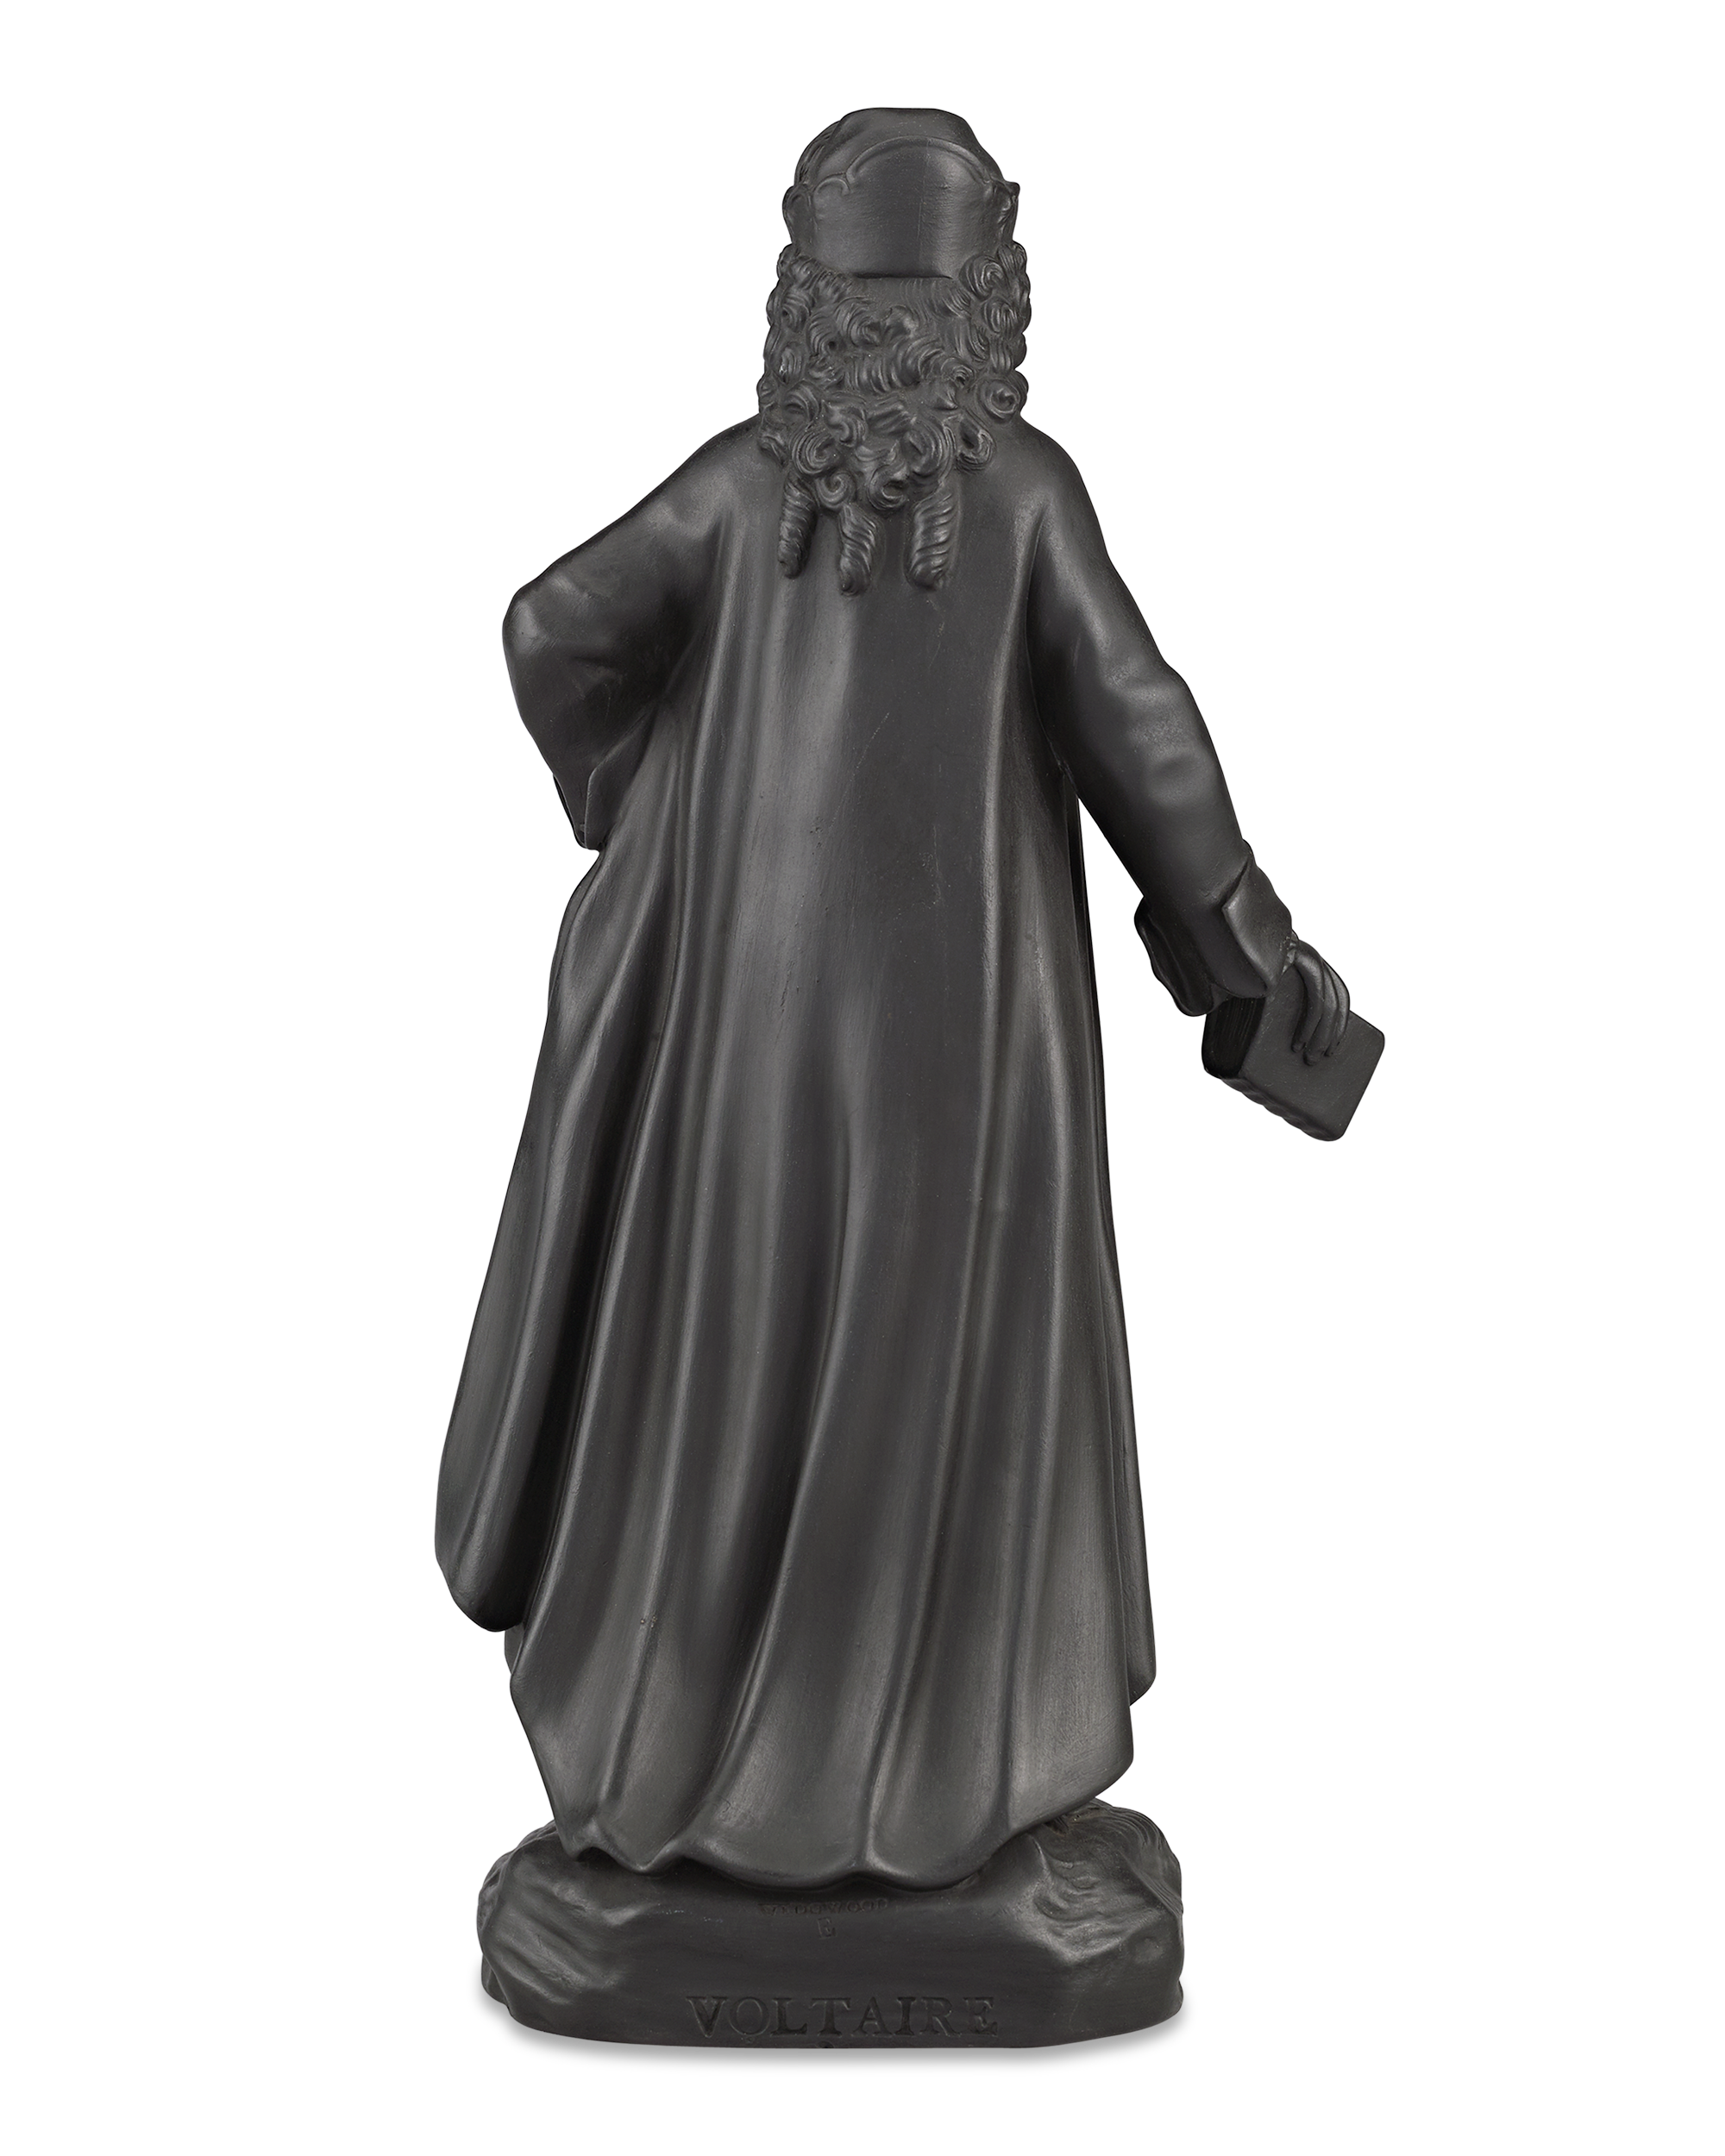 Black Basalt Figure of Voltaire by Wedgwood